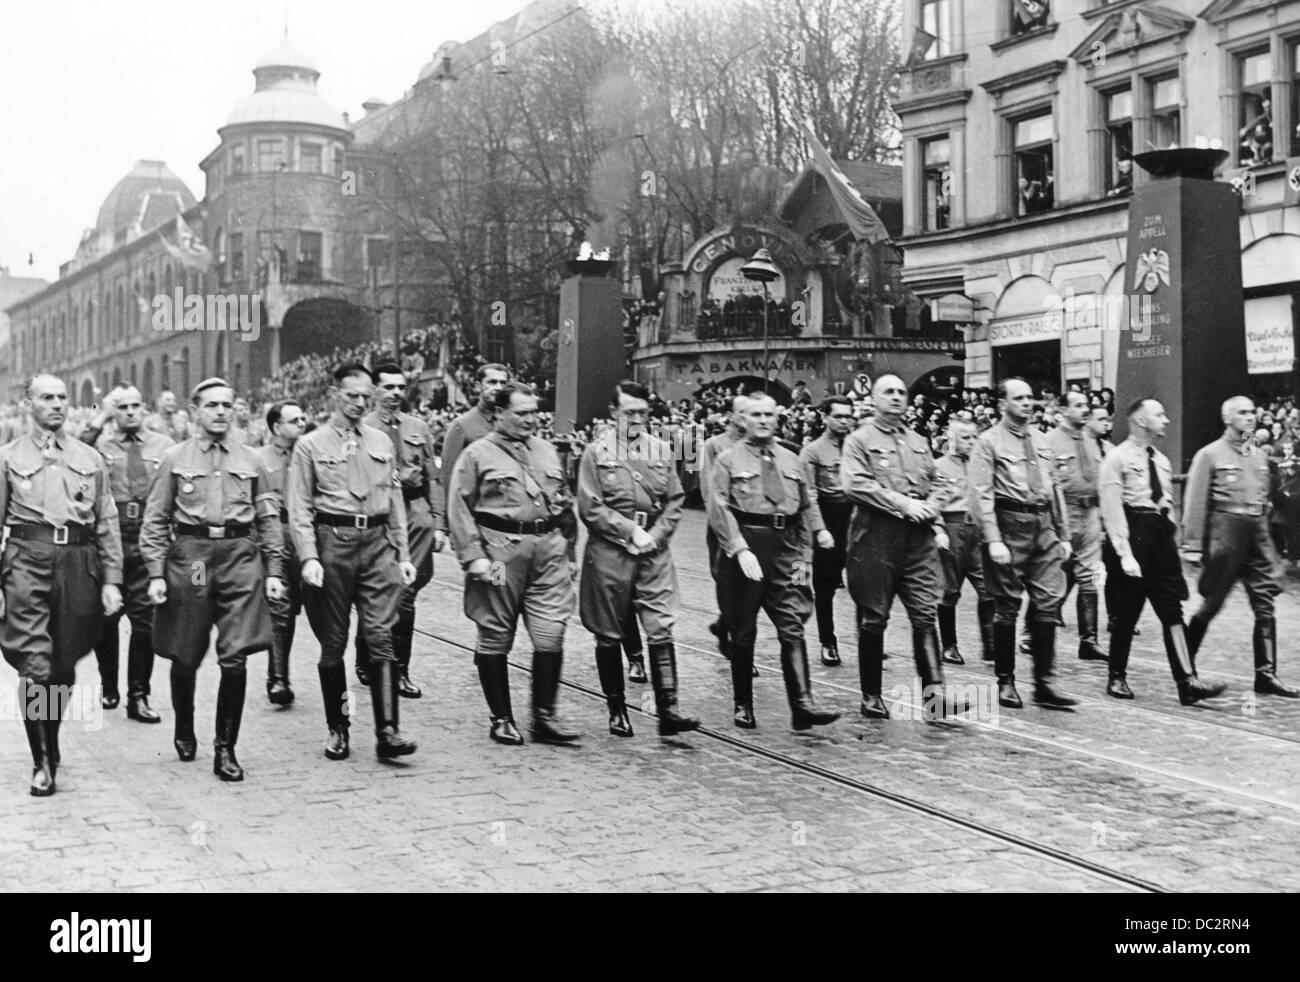 Adolf Hitler (m), Hermann Göring (4-l) and Ulrich Graf (6-l) march towards the Feldherrenhalle to commemorate the Beer Hall Putsch of November 1923 in Munich, Germany, 9 November 1938. On that same night, Joseph Goebbels initiated the Reichskristallnacht (Night of Broken Glass) with his speech in the Old City Hall. The Nazi Propaganda! on the back of the image is dated 9 November 1938: '9 November in Munich - The historical march. The Führer group, next to the Führer, Hermann Göhring and Ulrich Graf.' Fotoarchiv für Zeitgeschichte Stock Photo